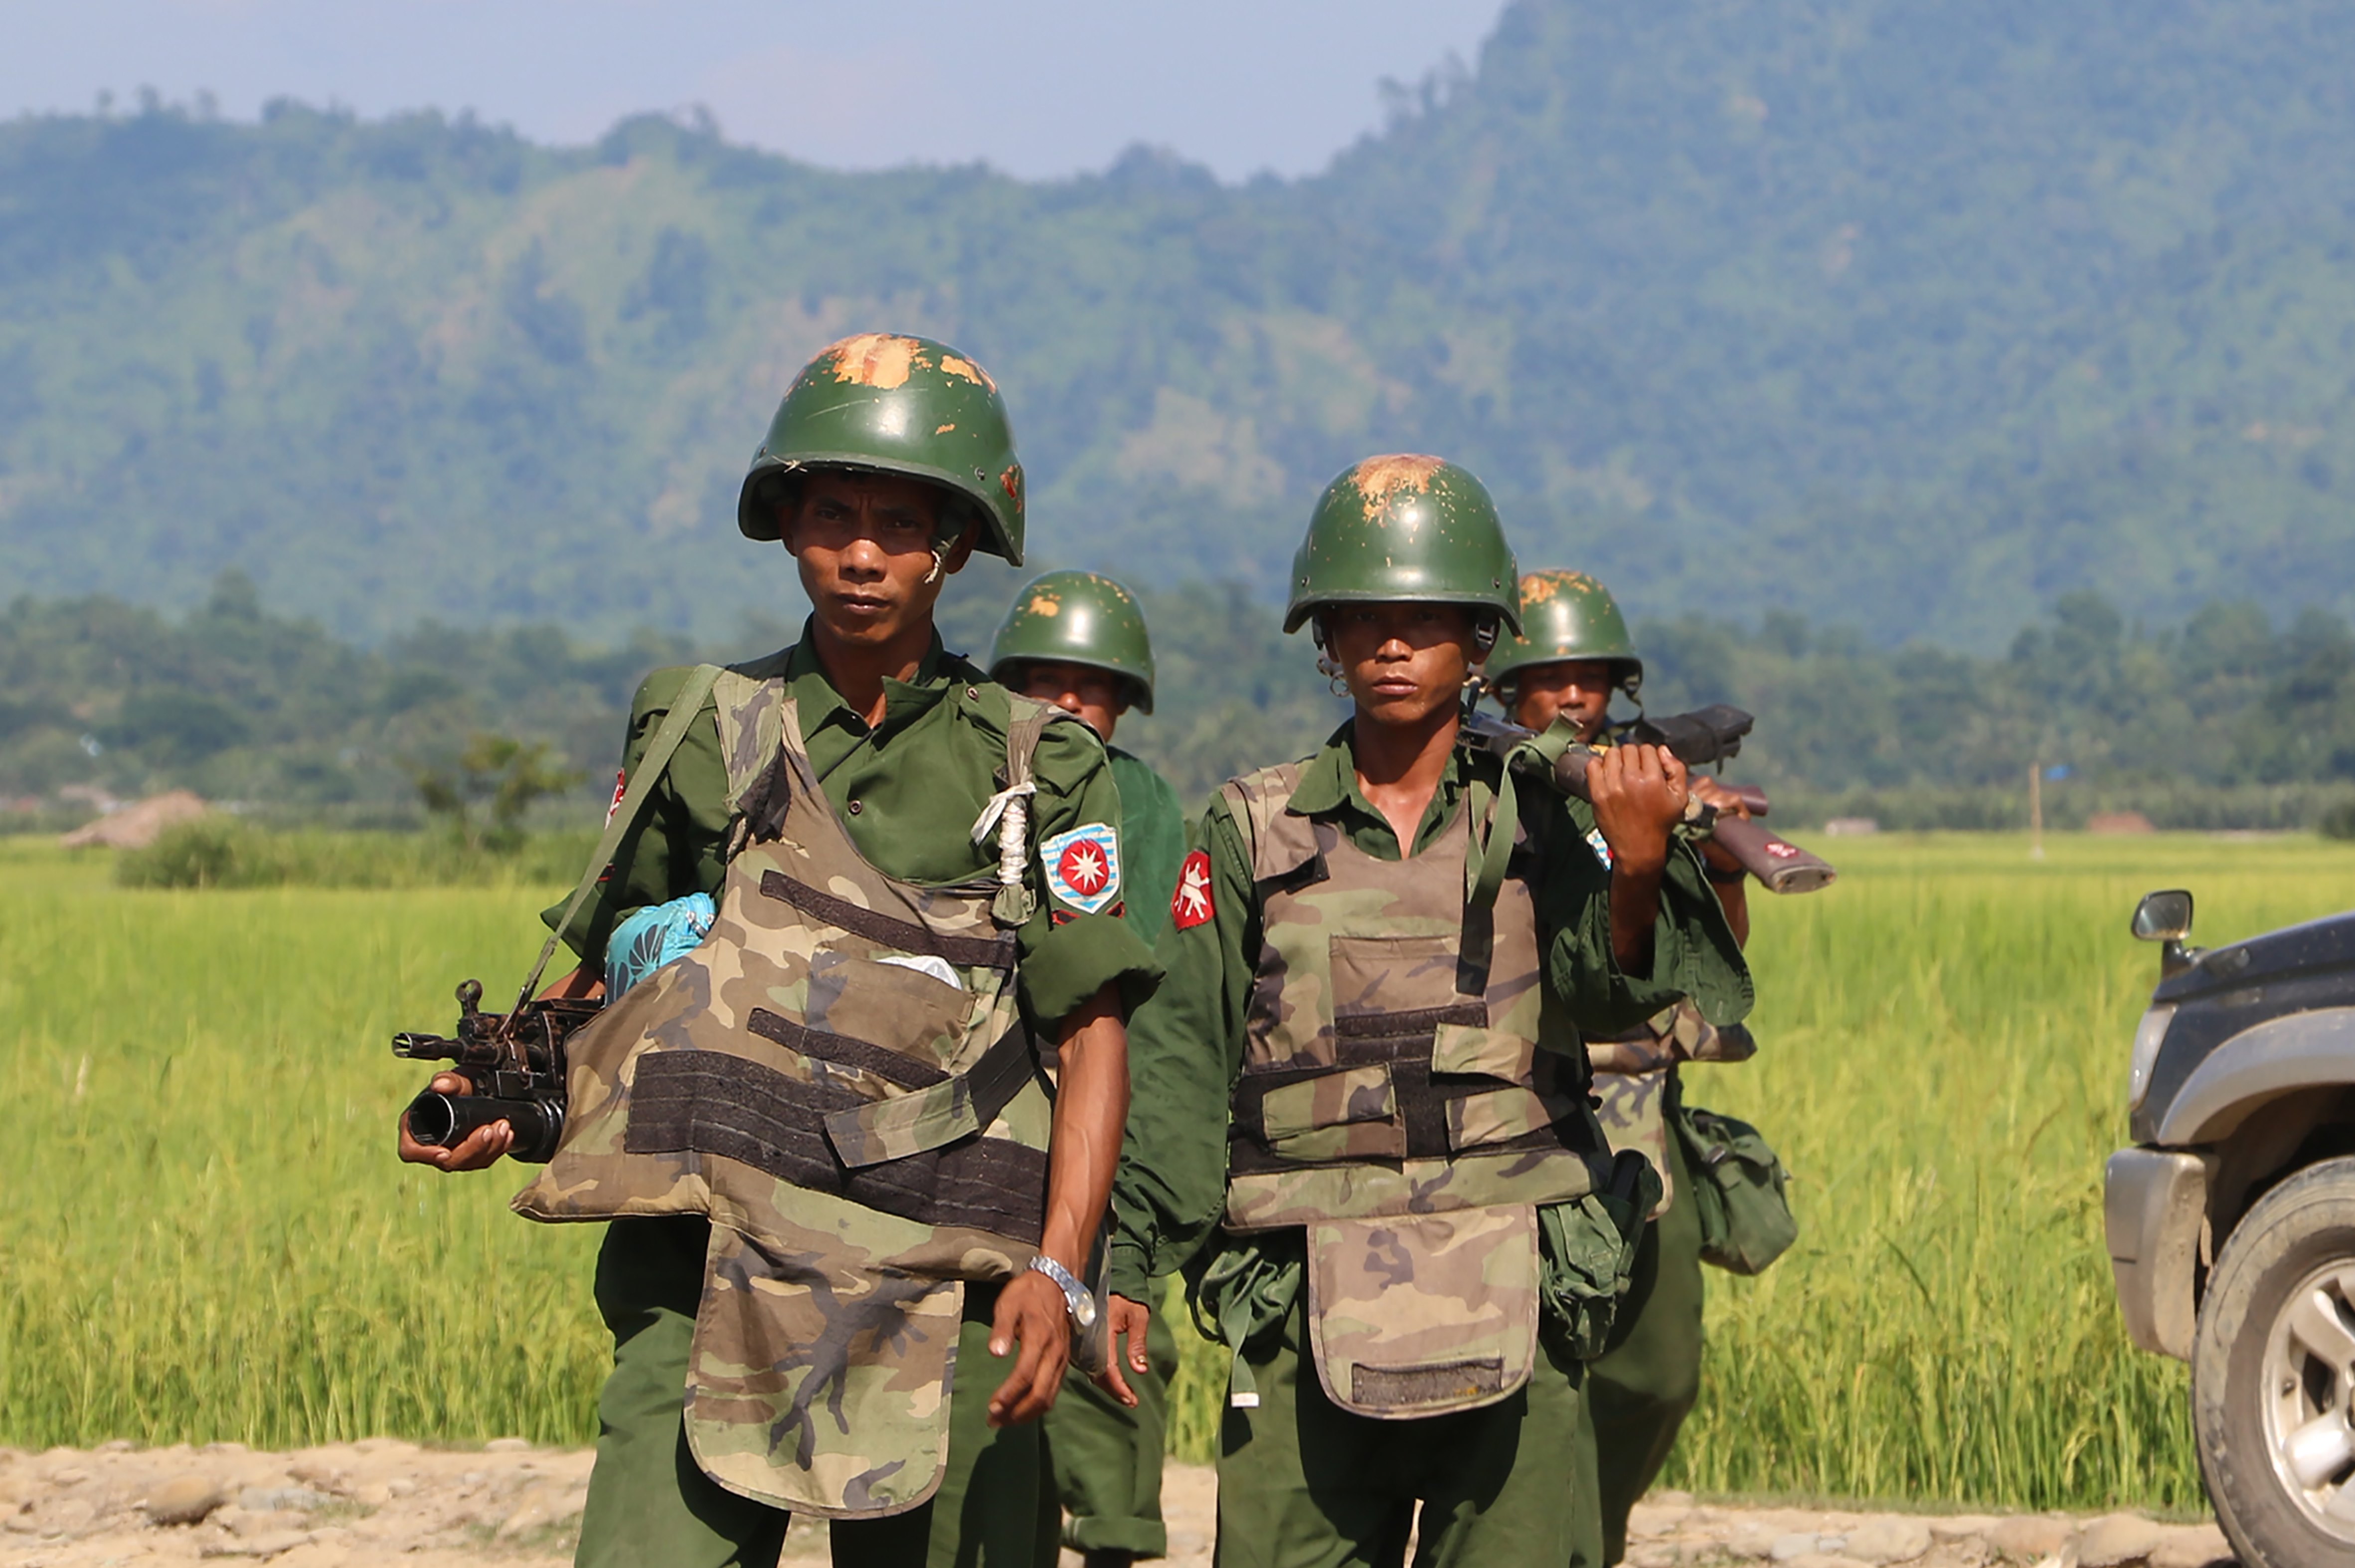 In this photograph taken on October 21, 2016, armed Myanmar soldiers patrol a village in Maungdaw located in Rakhine State as security operation continue following the October 9, 2016 attacks by armed militant Muslims. (AFP/Getty Images)